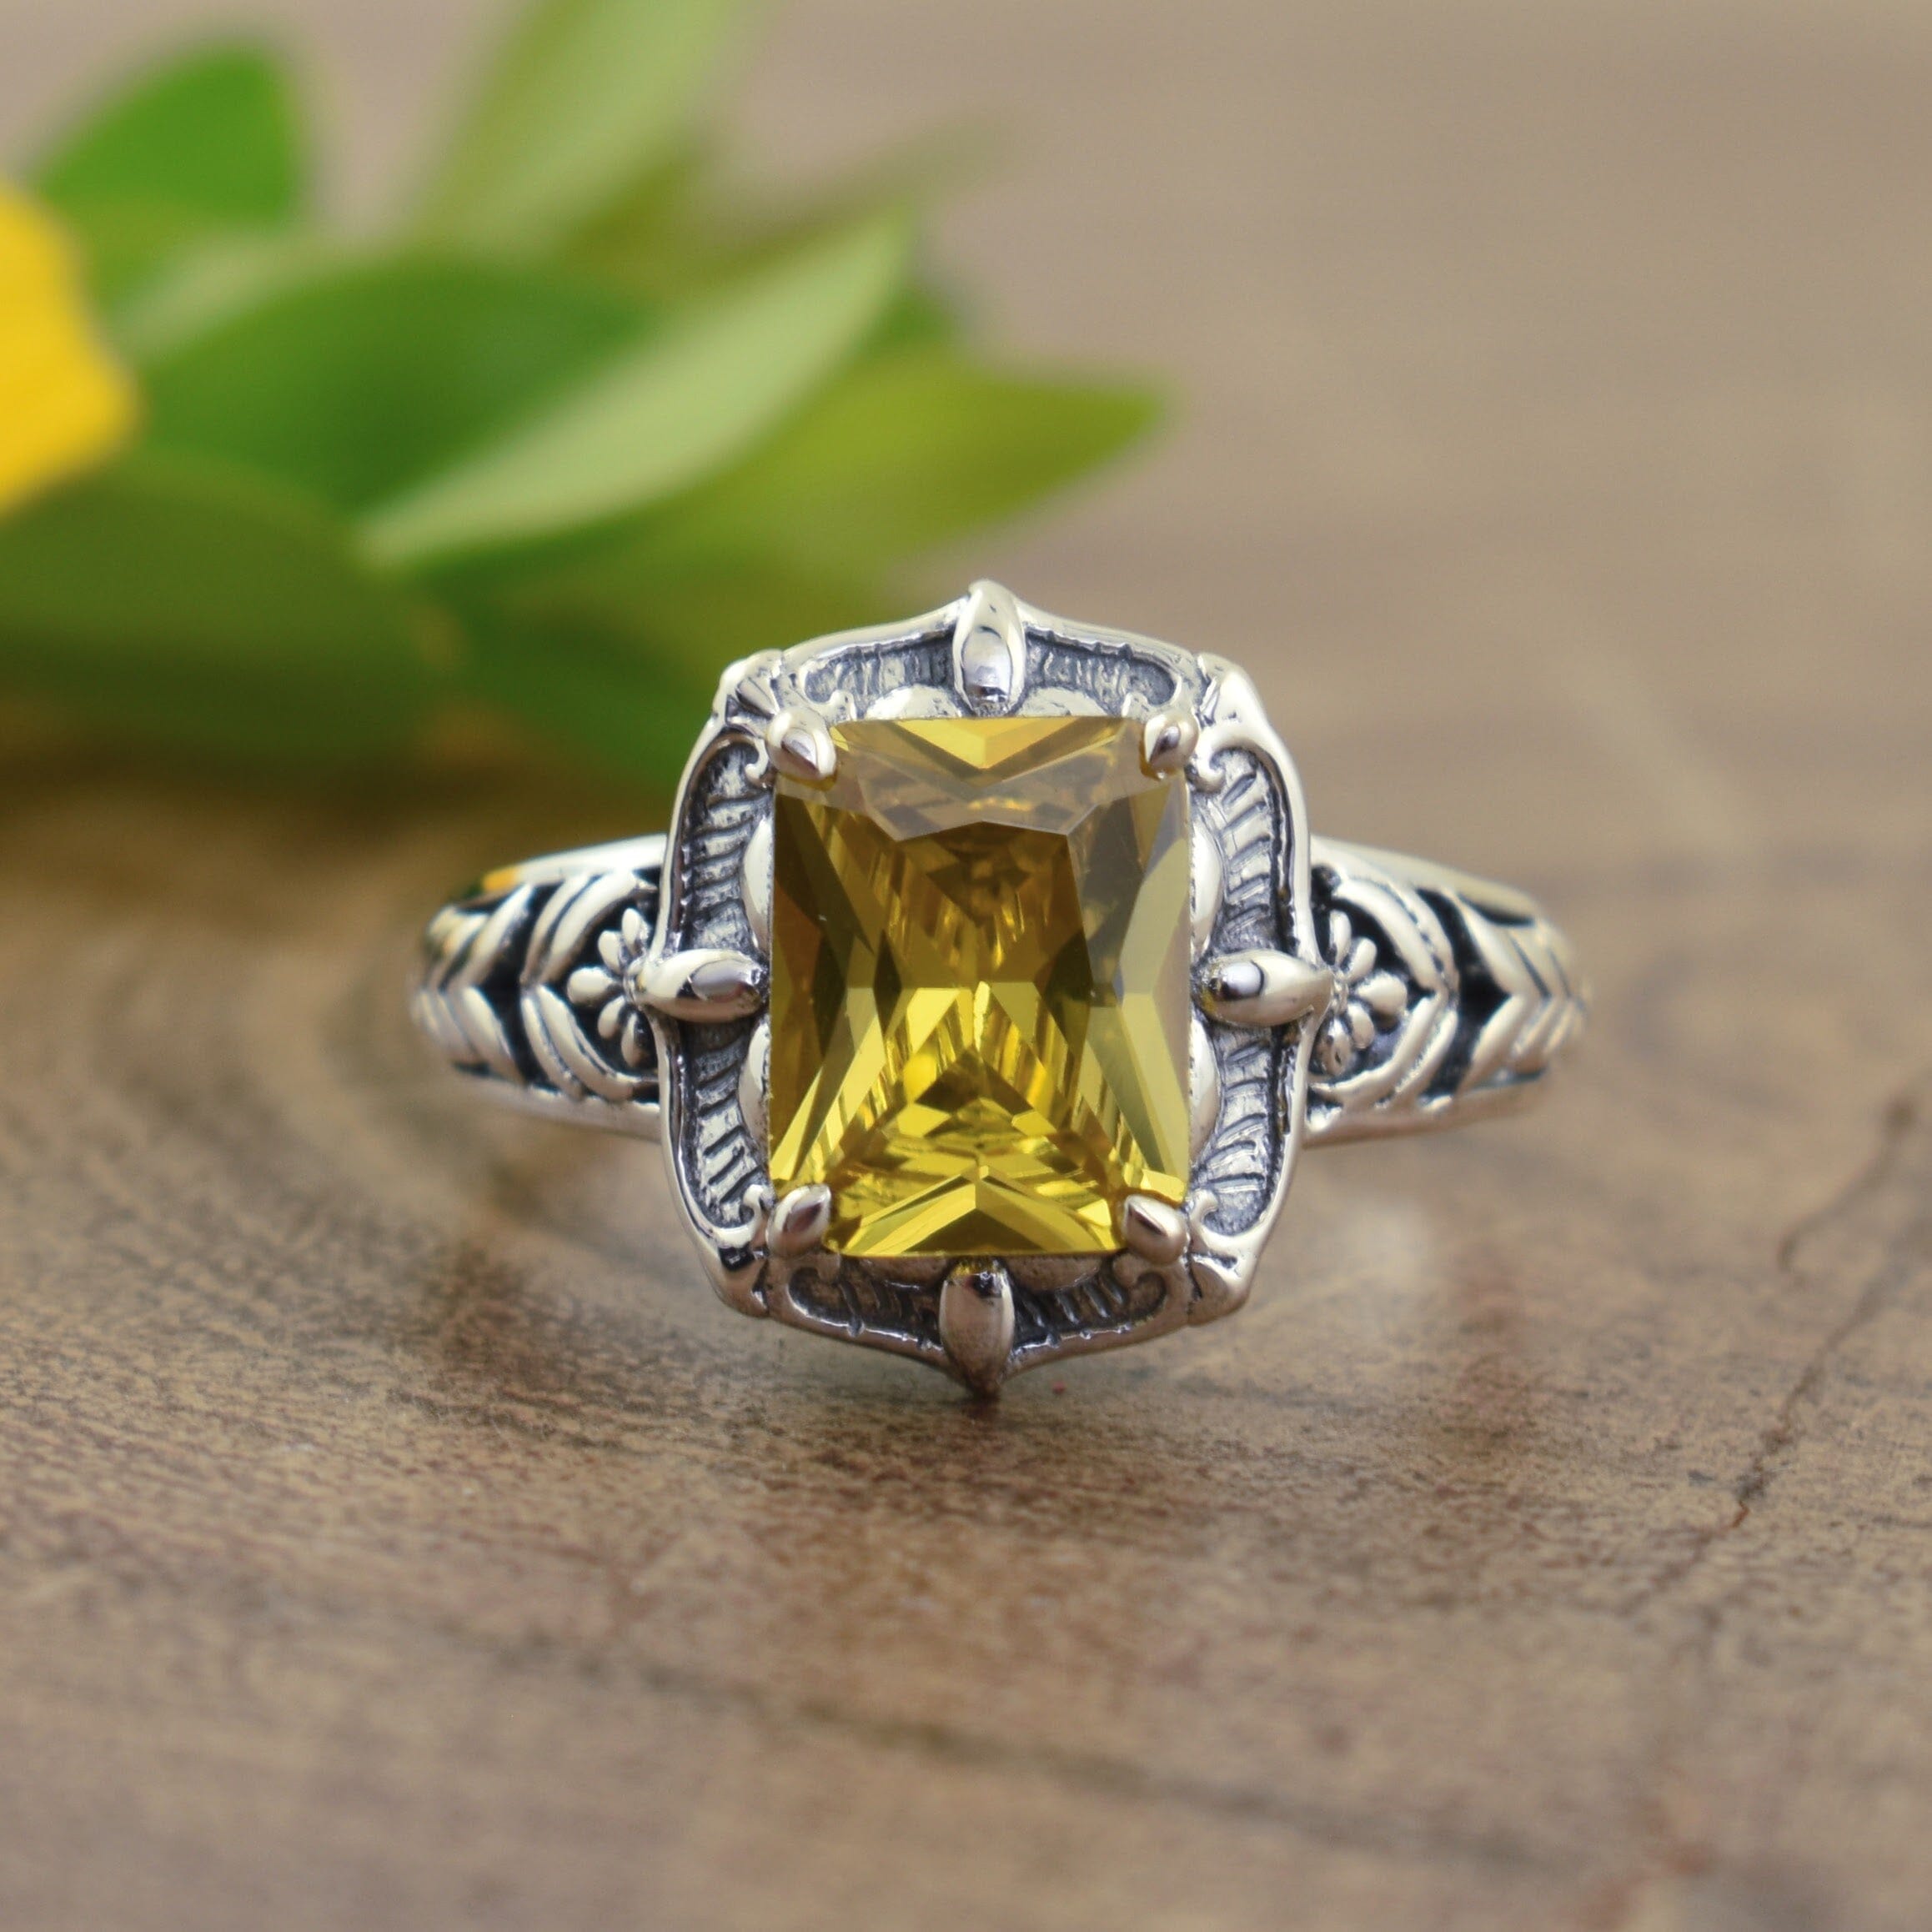 Antiqued sterling silver ring with rectangular stone